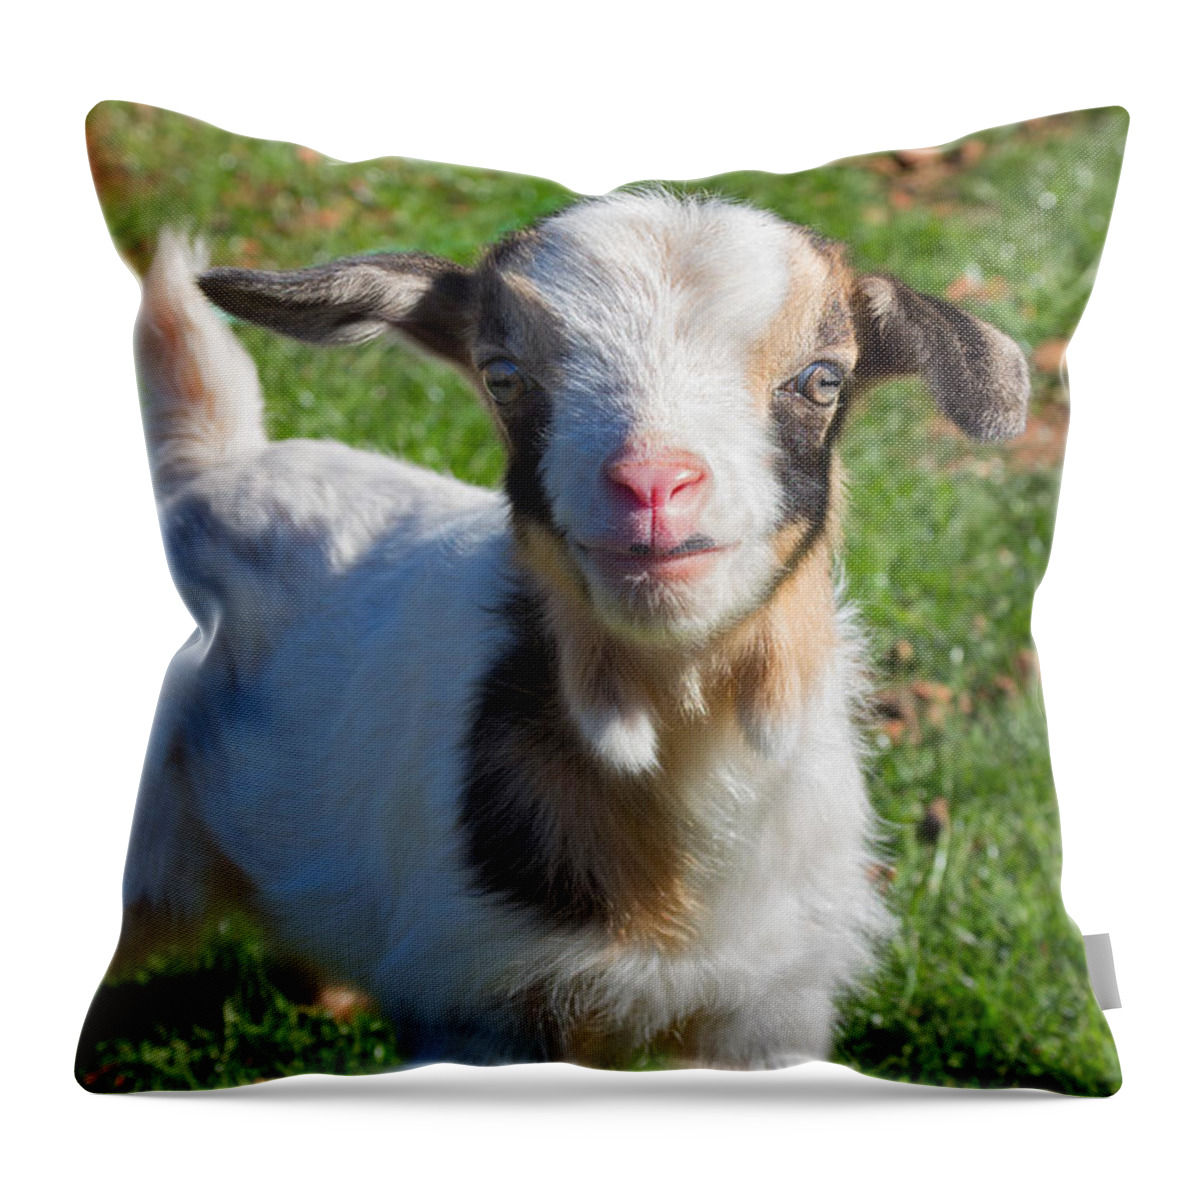 Cute Throw Pillow featuring the photograph Curious Baby Goat by Kathleen Bishop